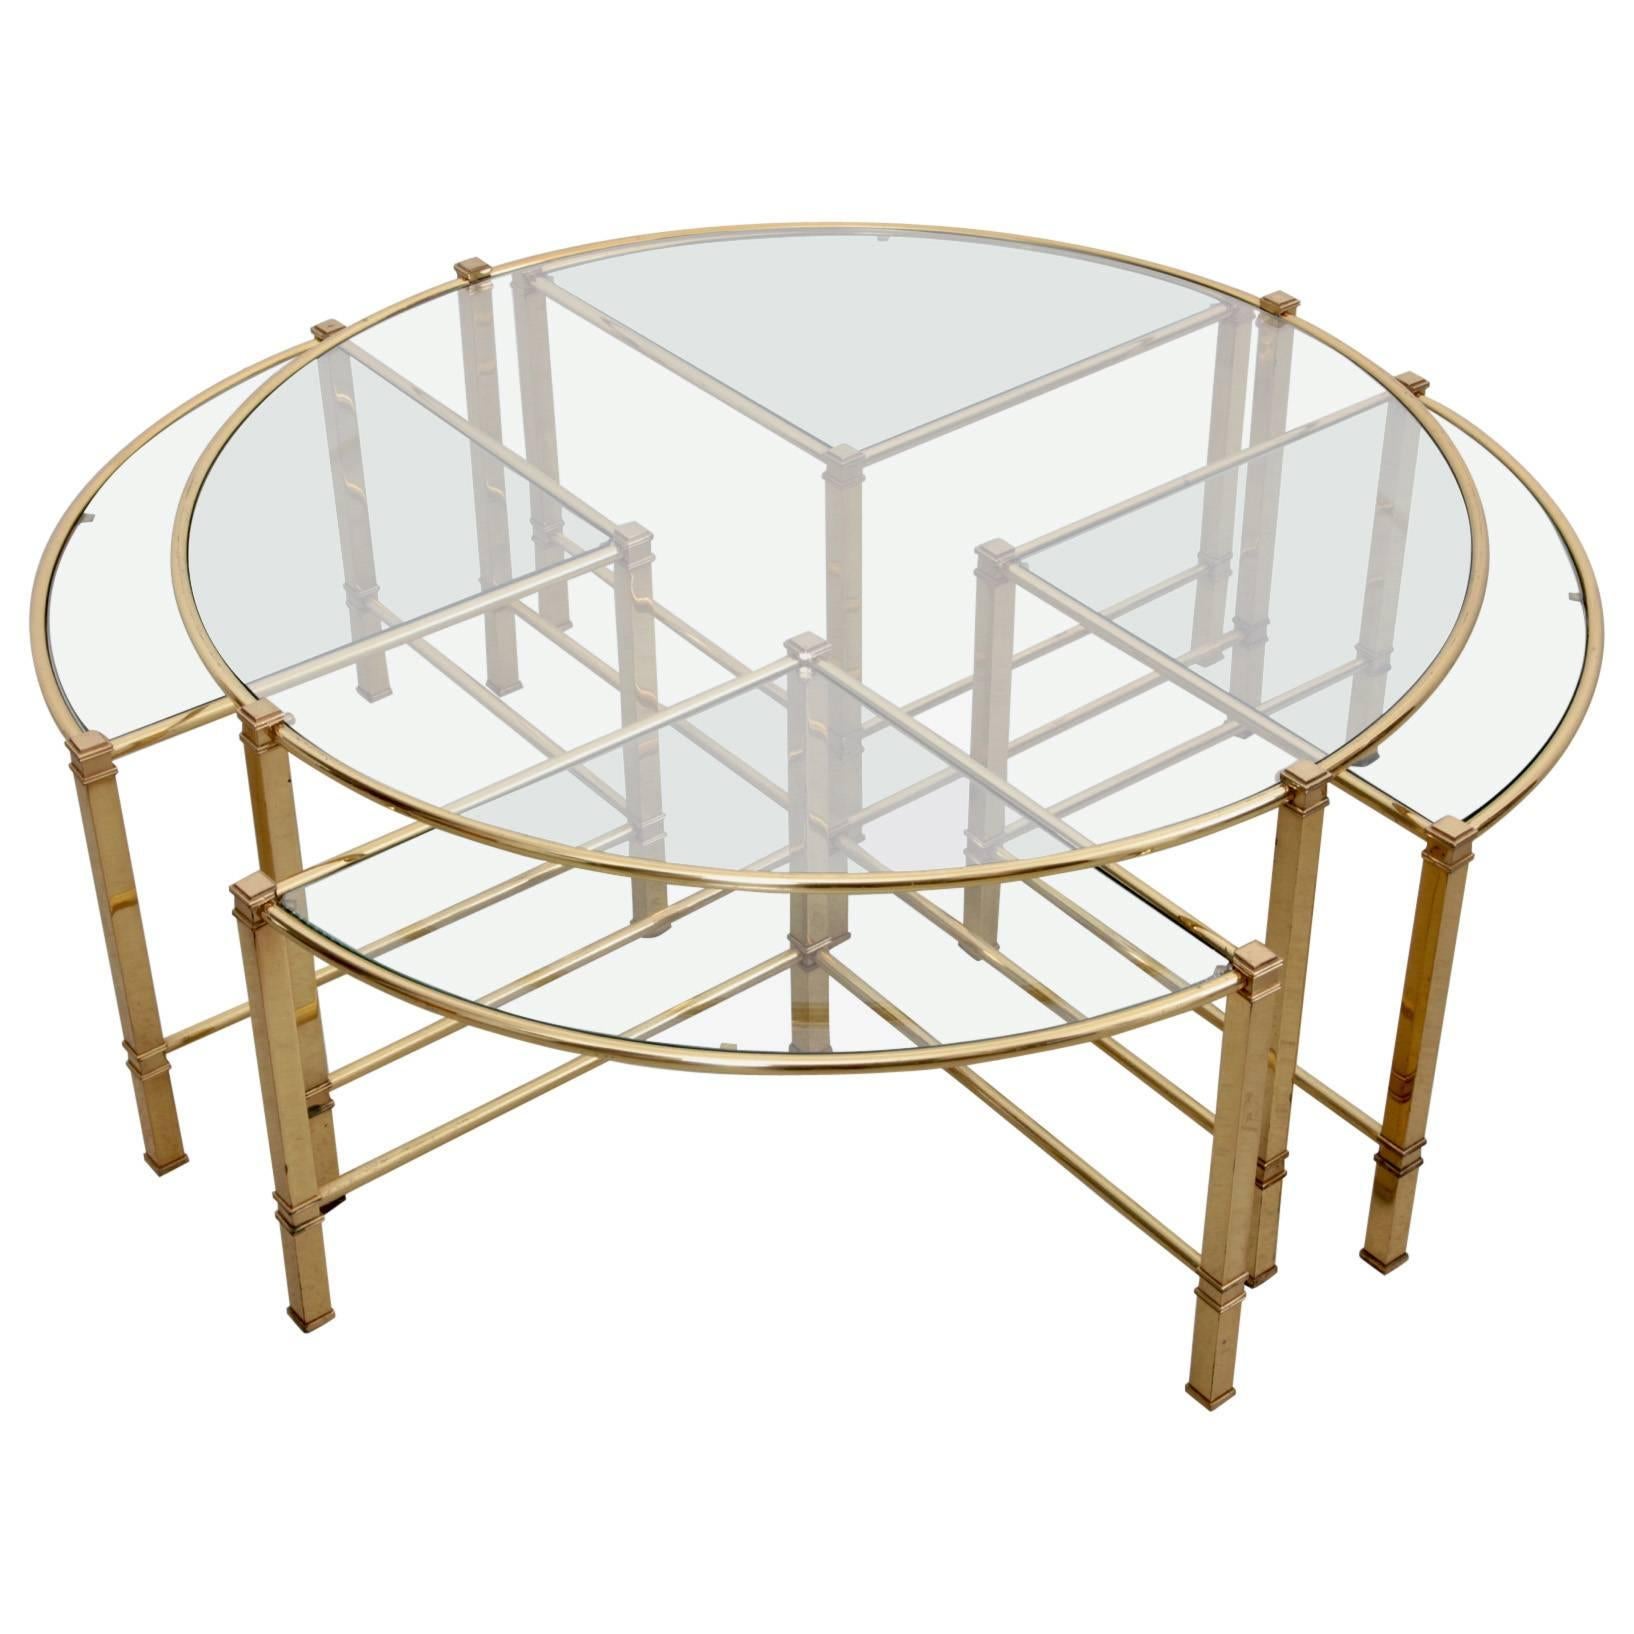 Huge Round Coffee Table in Brass with Four Nesting Tables by Maison Charles